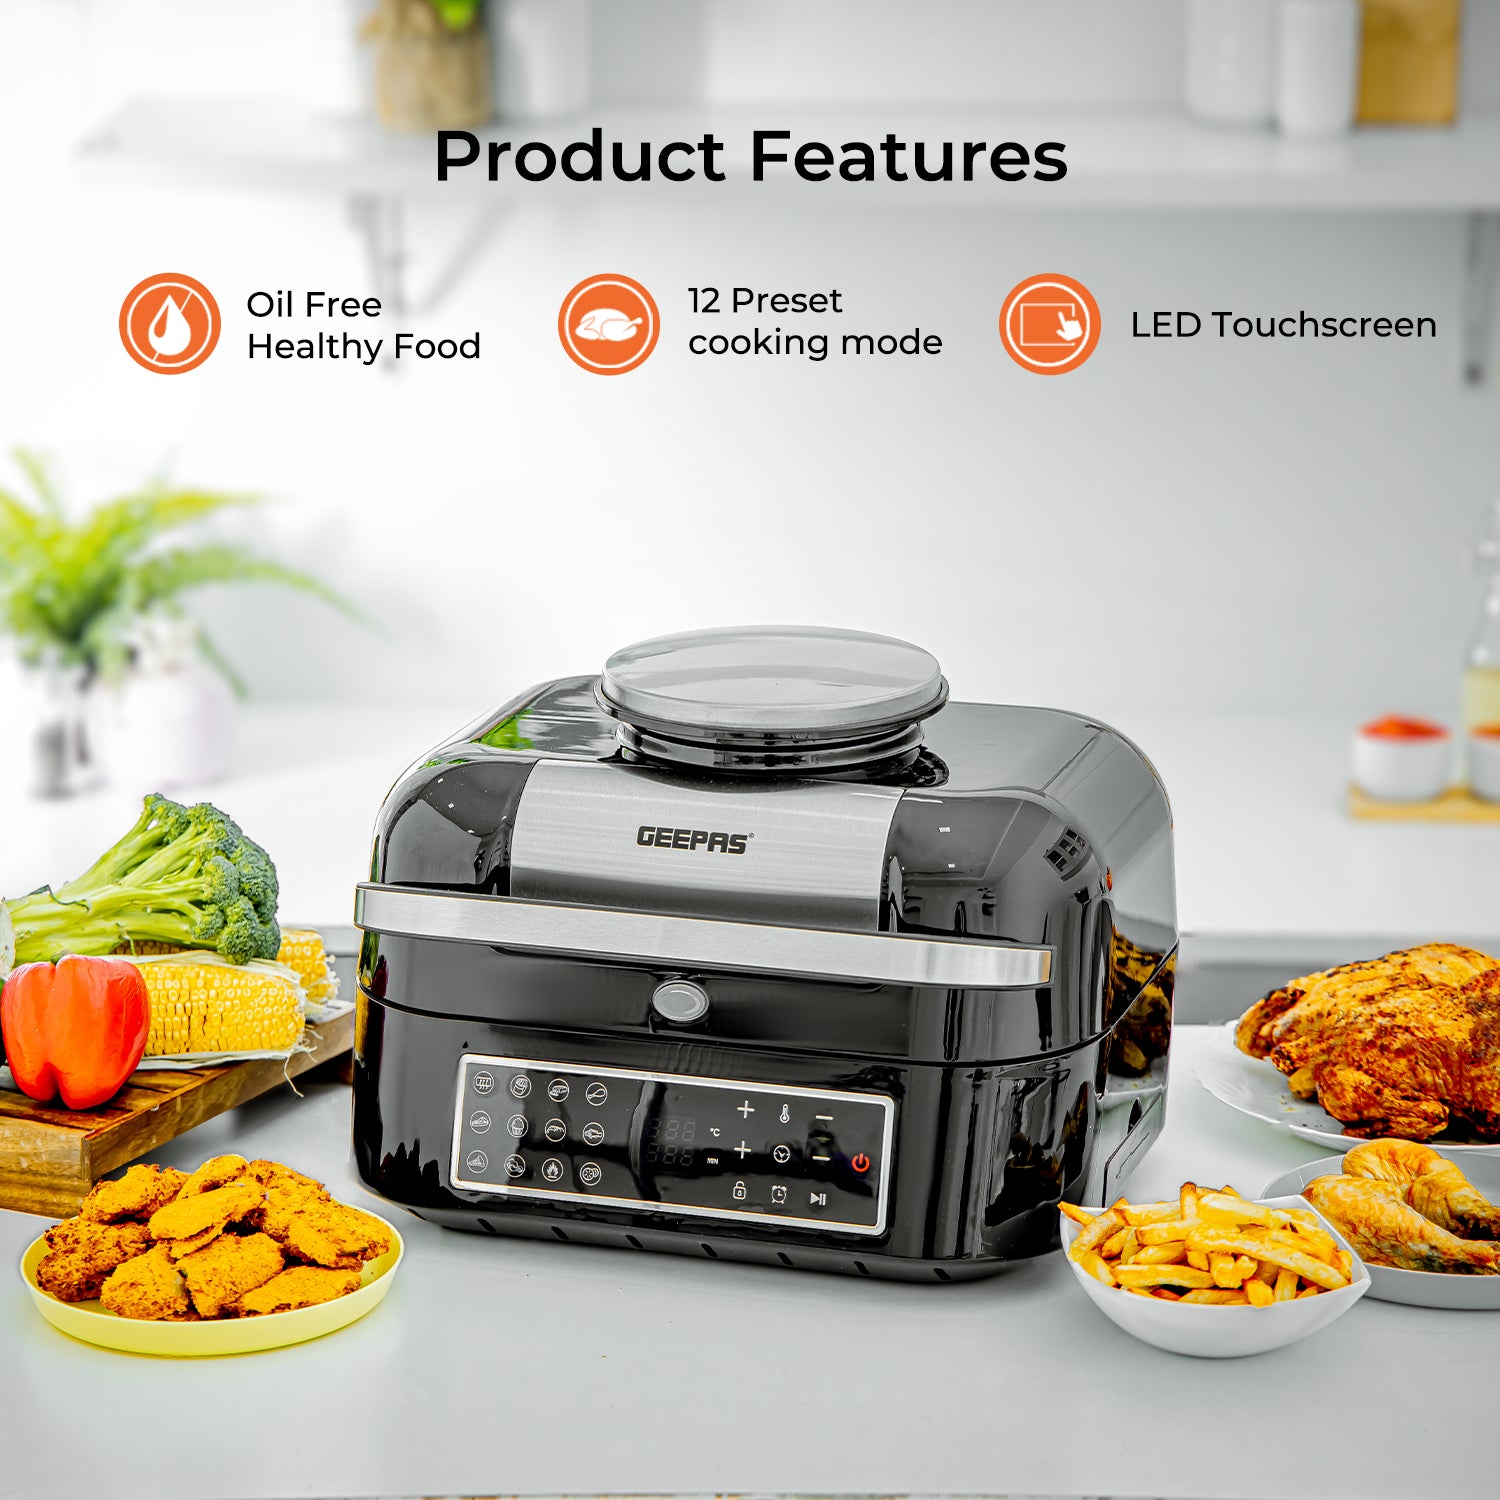 The three main product features of the 12 in 1 healthy air fryer grill - oil free healthy cooking, 12 preset cooking modes and LED touchscreen display